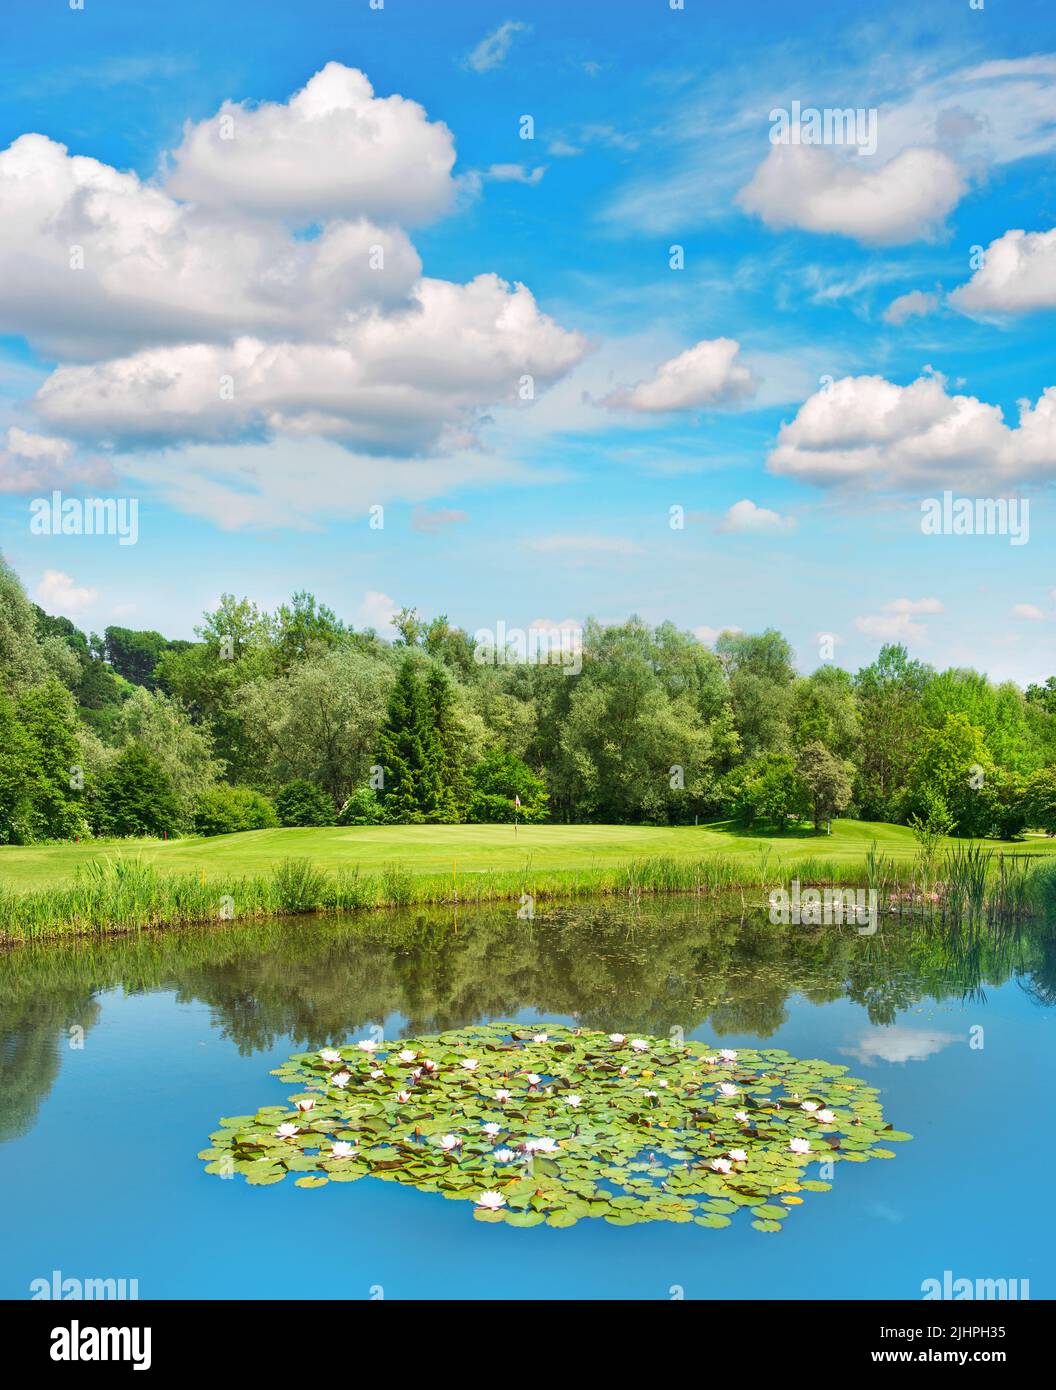 Golf course green field with lake and beautiful blue sky. European landscape Stock Photo